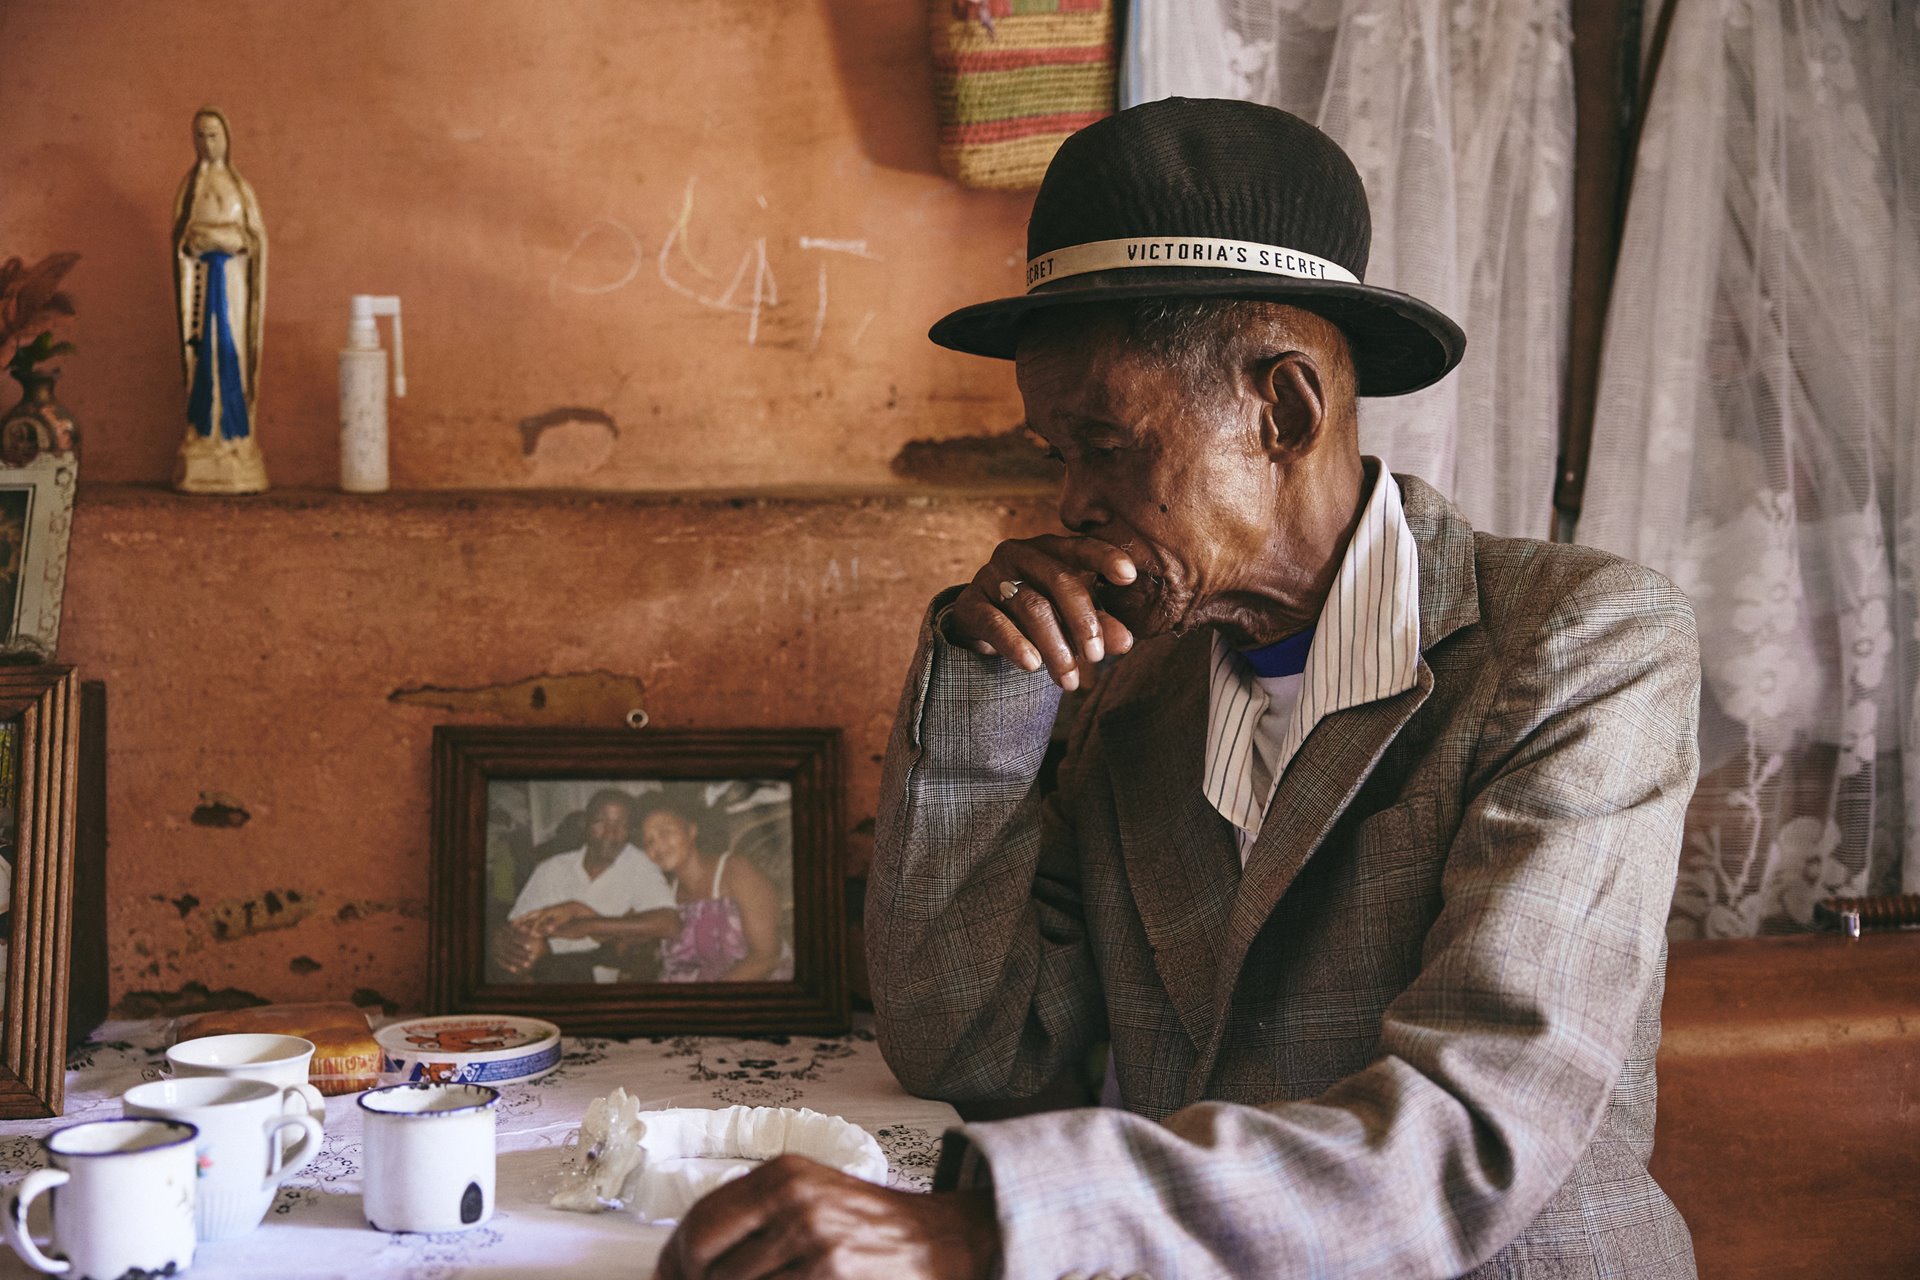 Dada Paul sits at home, in Antananarivo, Madagascar, beside a framed photograph of himself and his wife, who has passed away. He often forgets about her death and confuses his daughter, Fara, for his wife.